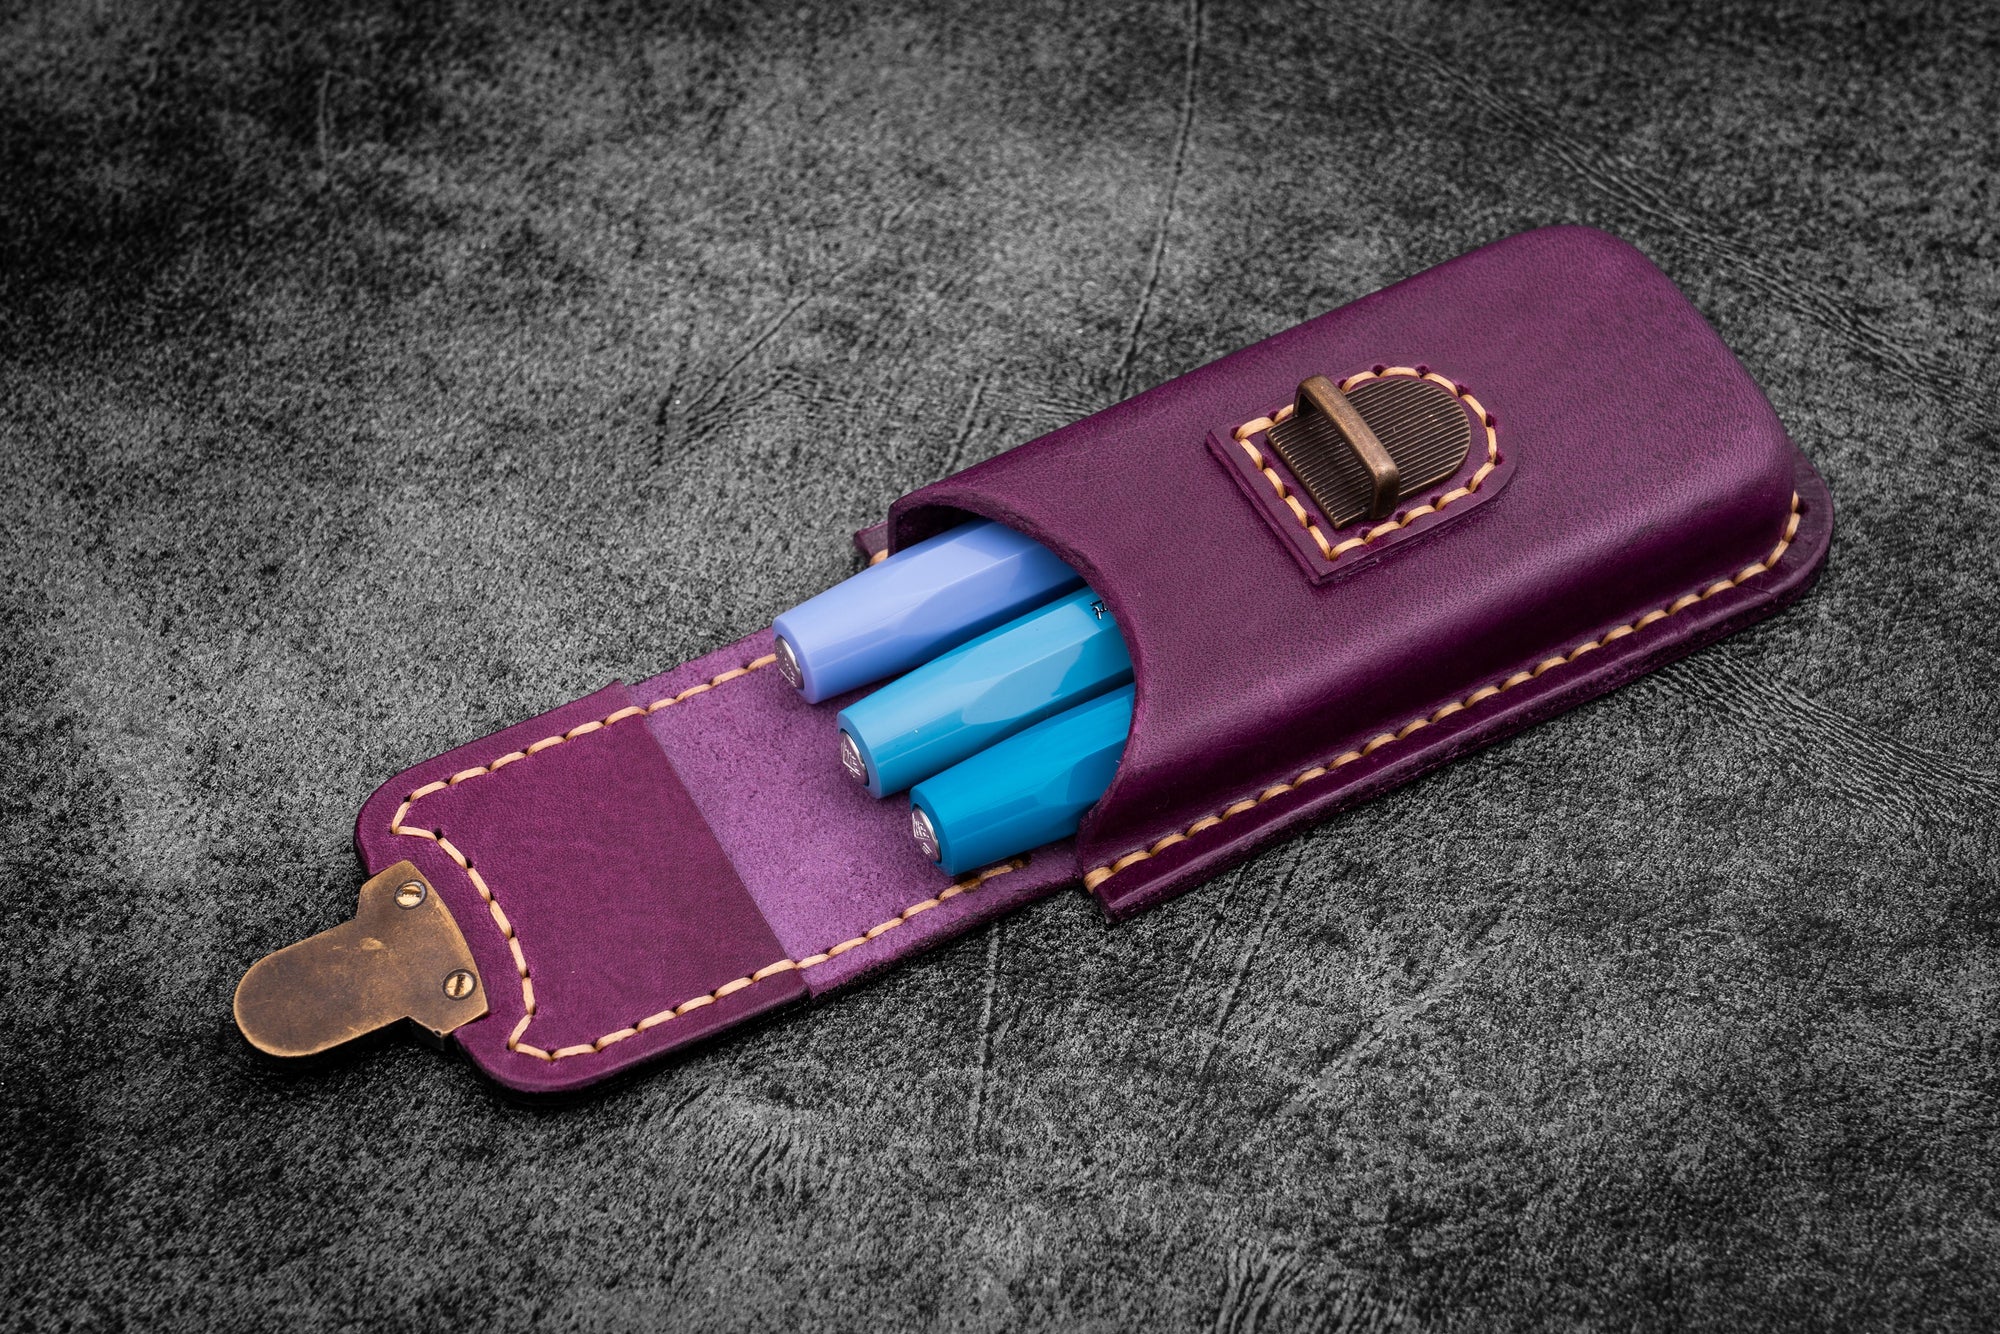 The Old School - Leather Molded Pen Case for 3 Pocket Pens - Purple